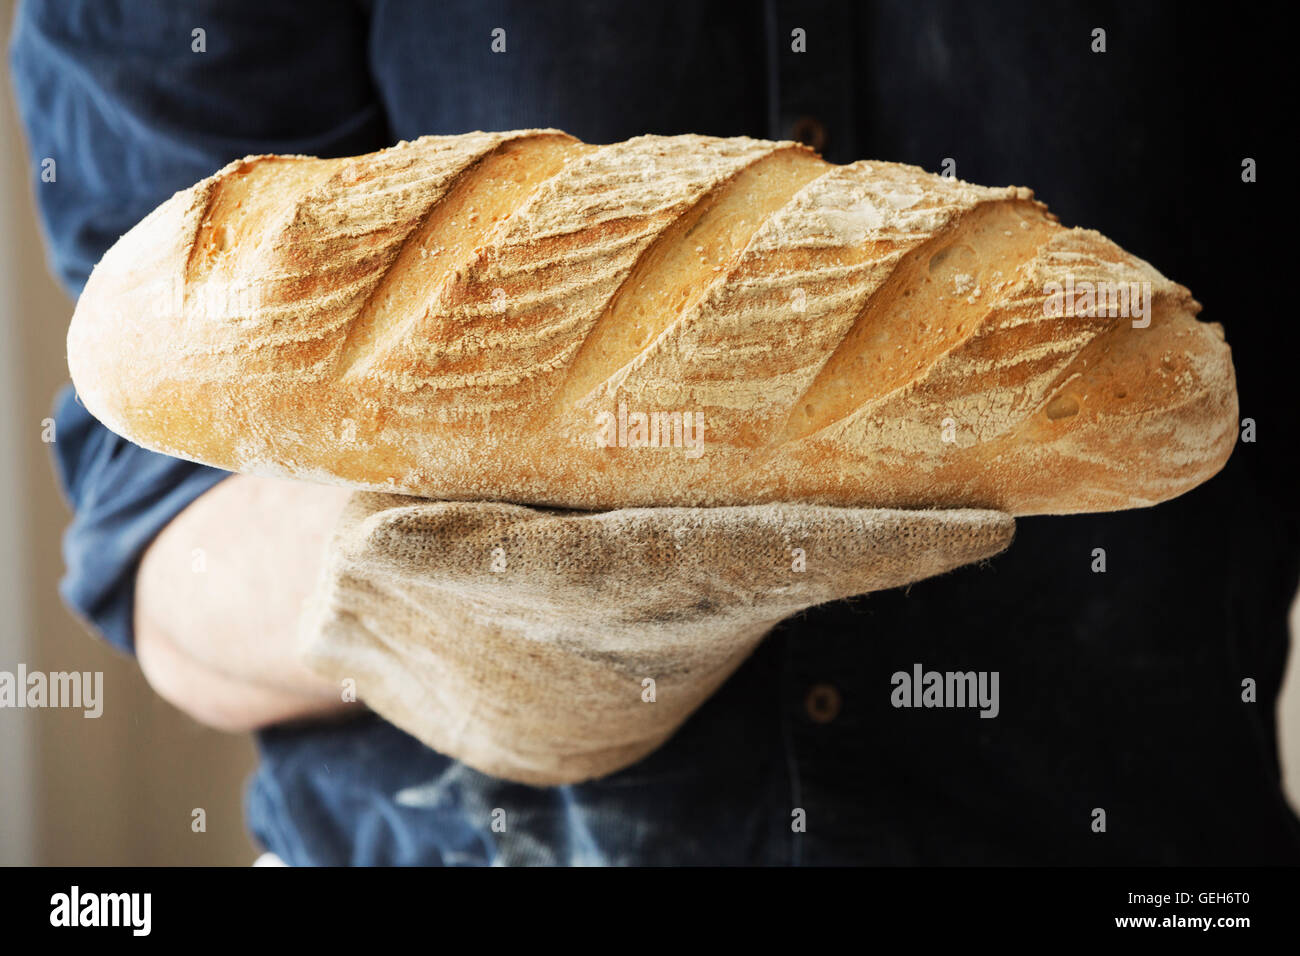 Baker holding two freshly baked loaves of bread. Stock Photo